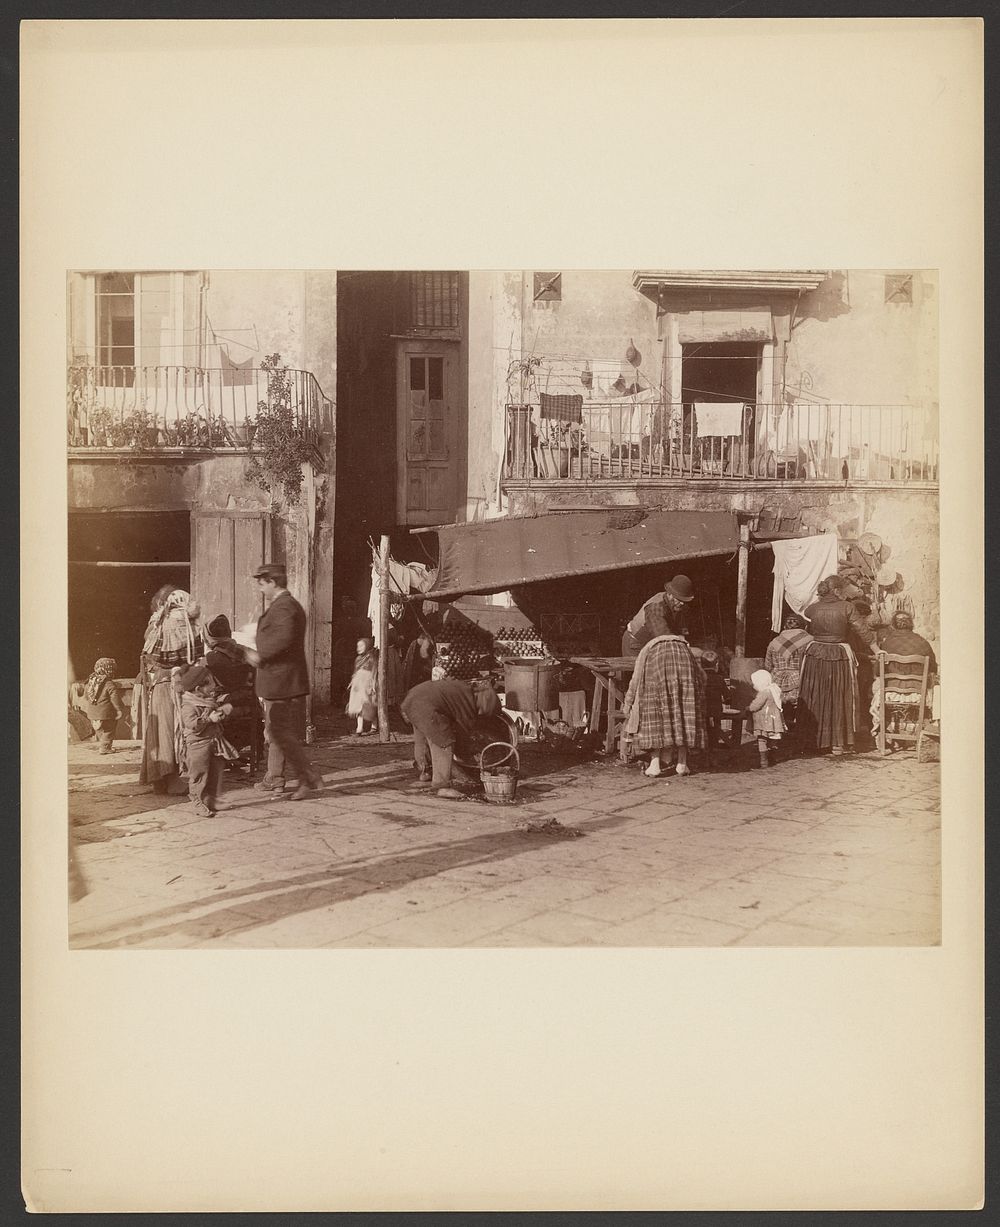 Street scene with produce vendor by Giorgio Sommer